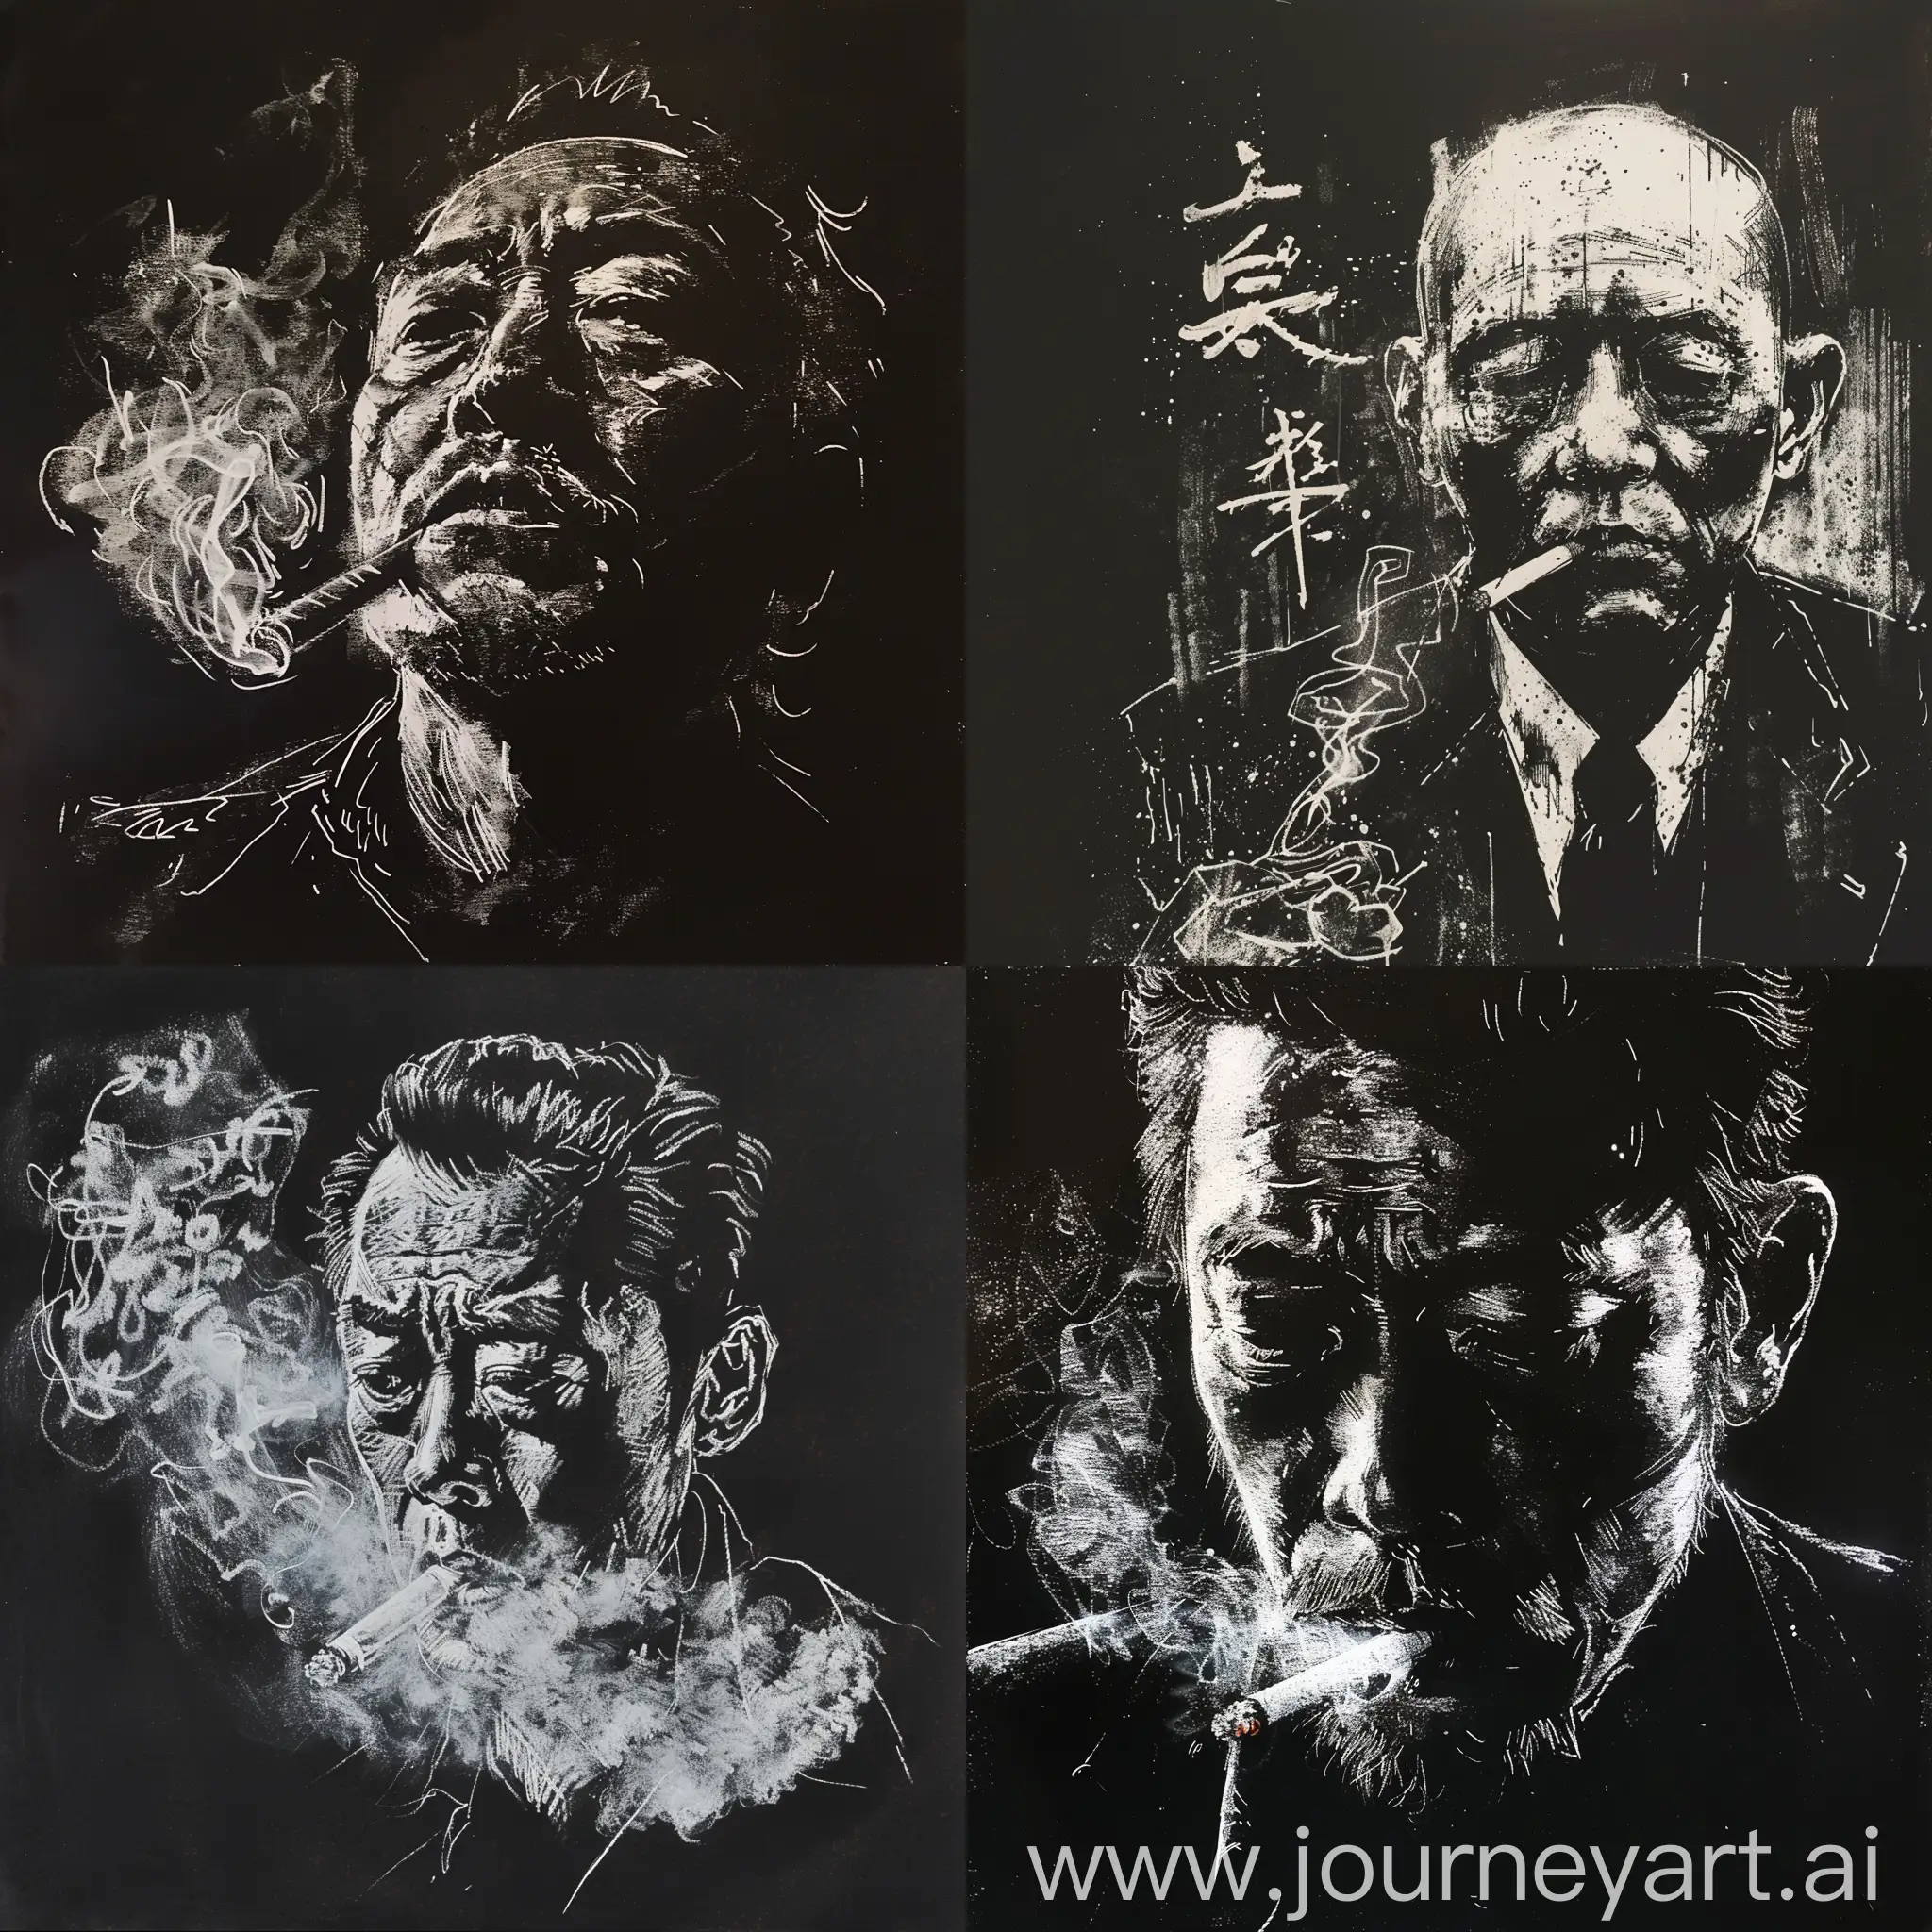 a sketch of "chinese triad member smoking in hong kong" by David Fincher, dry brush, white on black background 